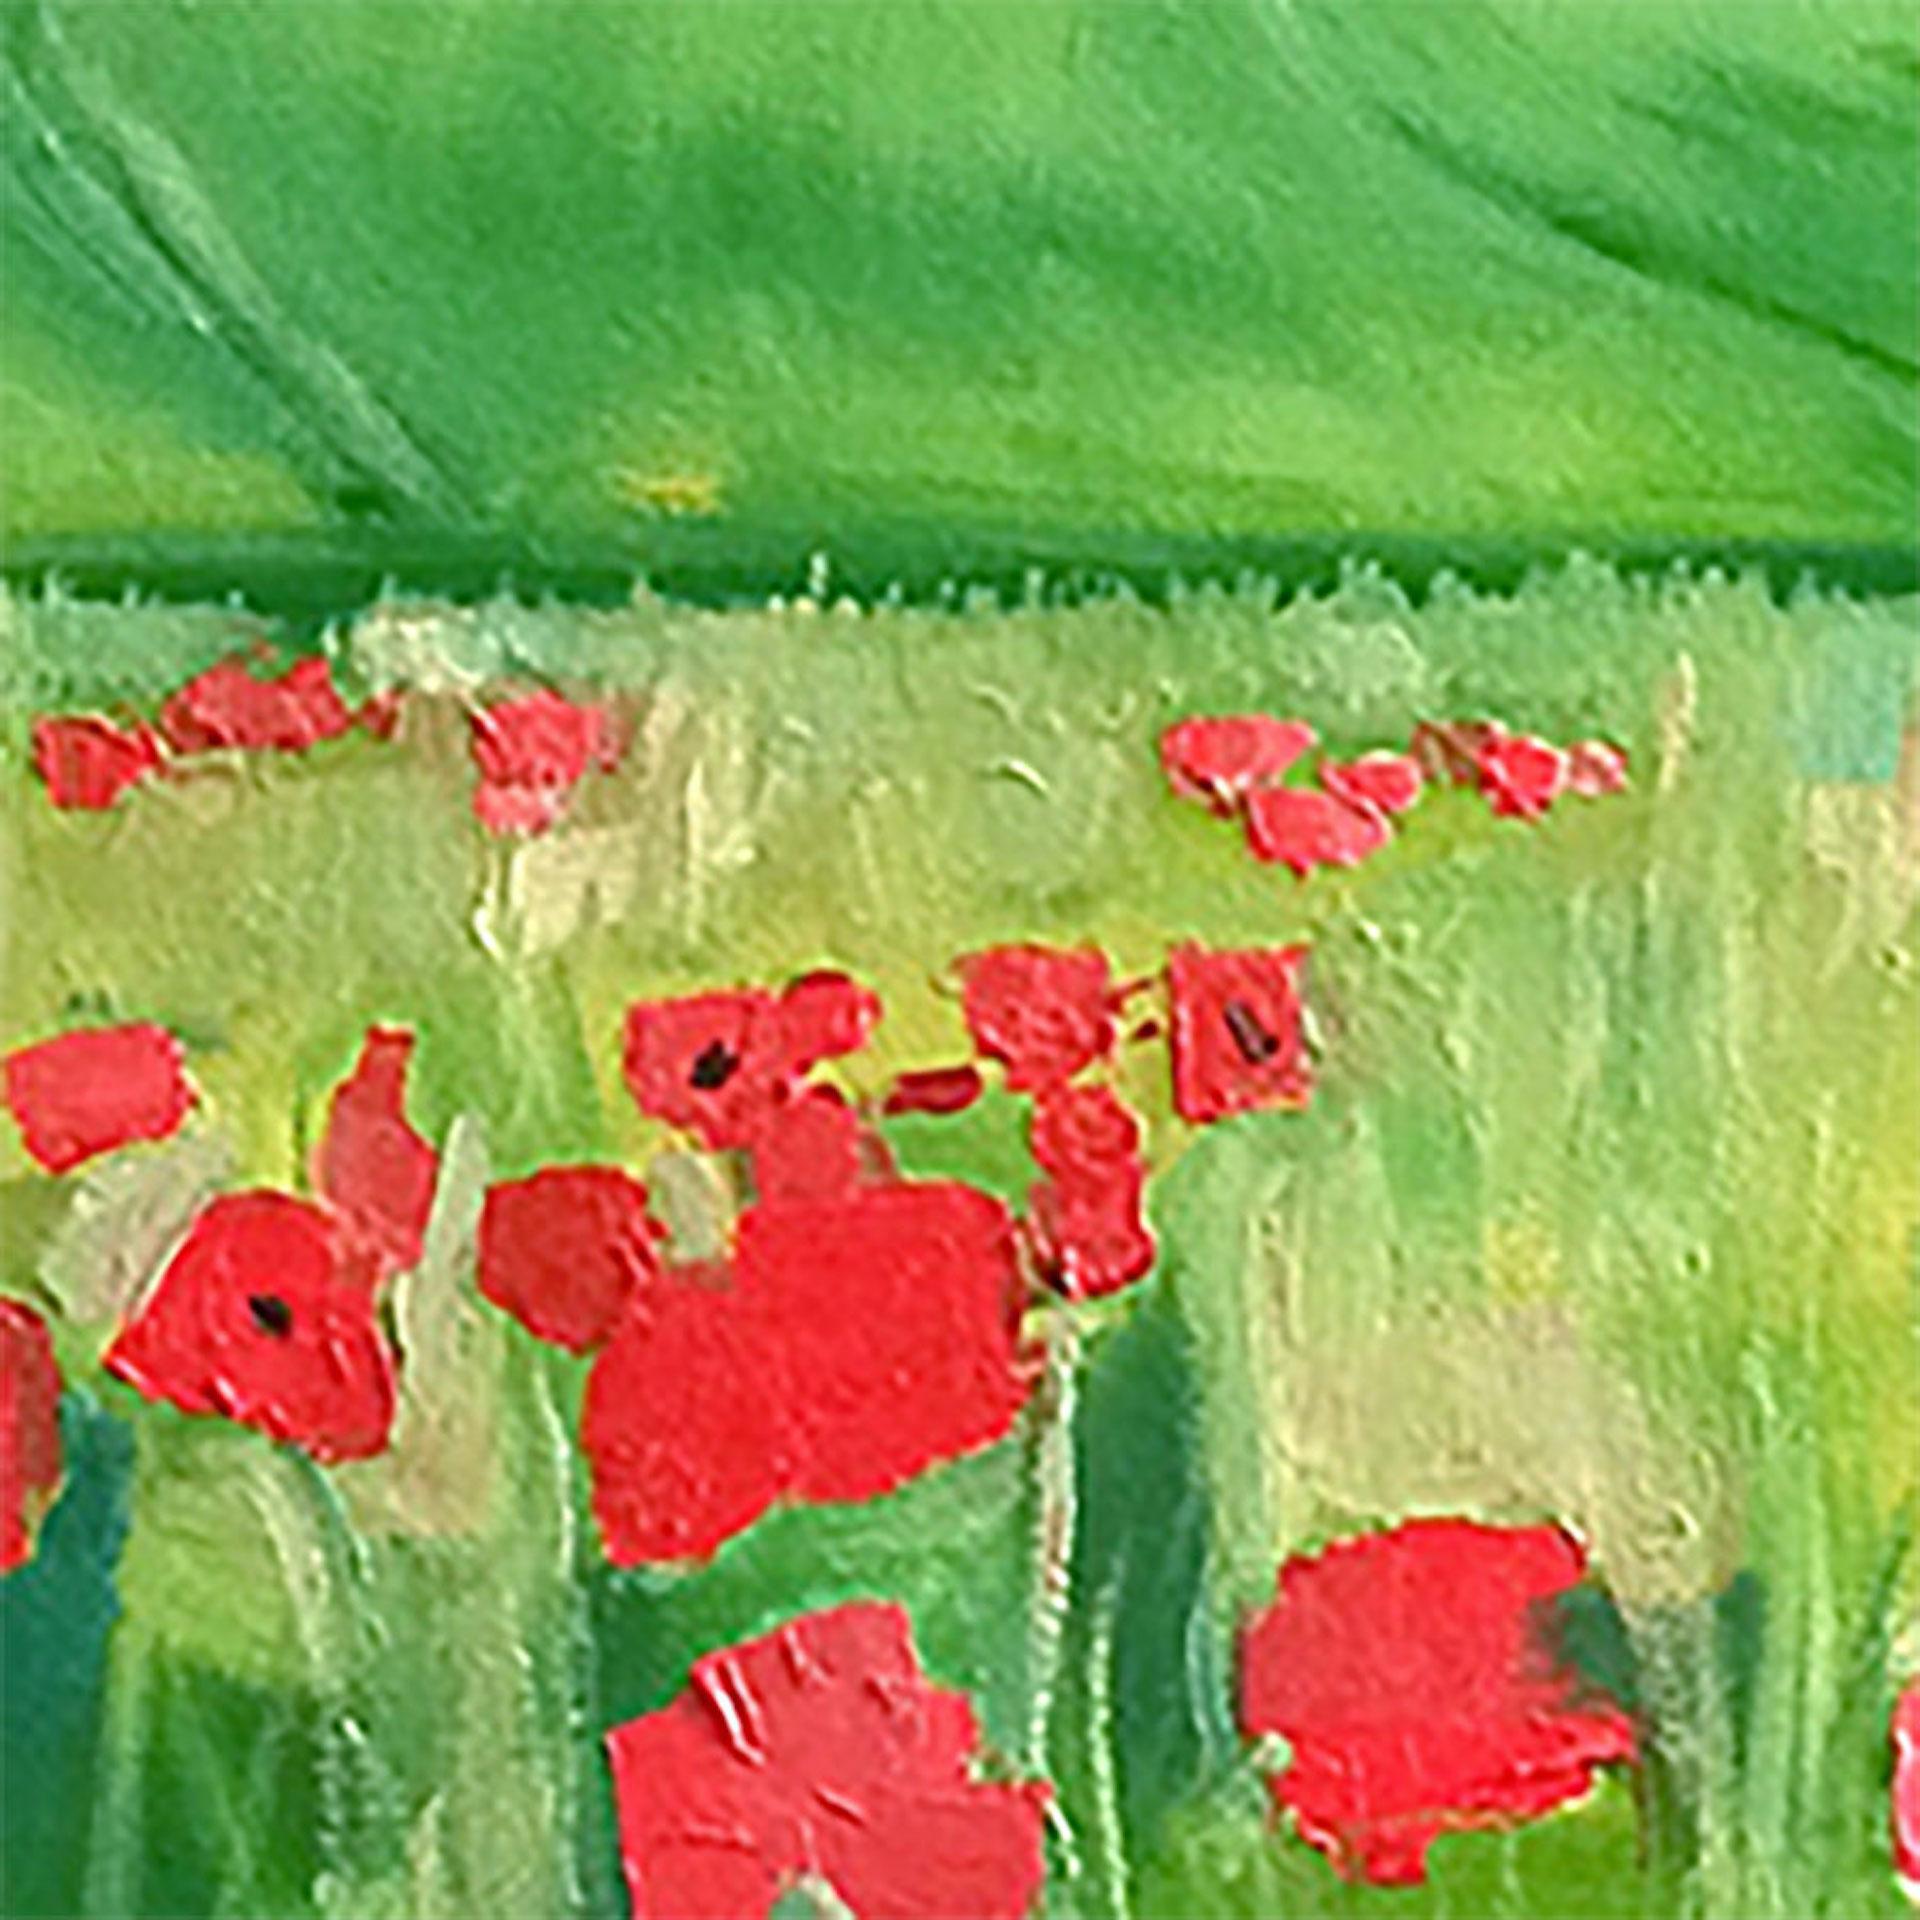 Eleanor Woolley
Polka Dot Poppies
Original Landscape Painting
Oil Paint on Canvas
Canvas Size: H 76cm x W 76cm x D 3.7cm
Sold Unframed
Ready to Hang
Please note that insitu images are purely an indication of how a piece may look.

Polka Dot Poppies